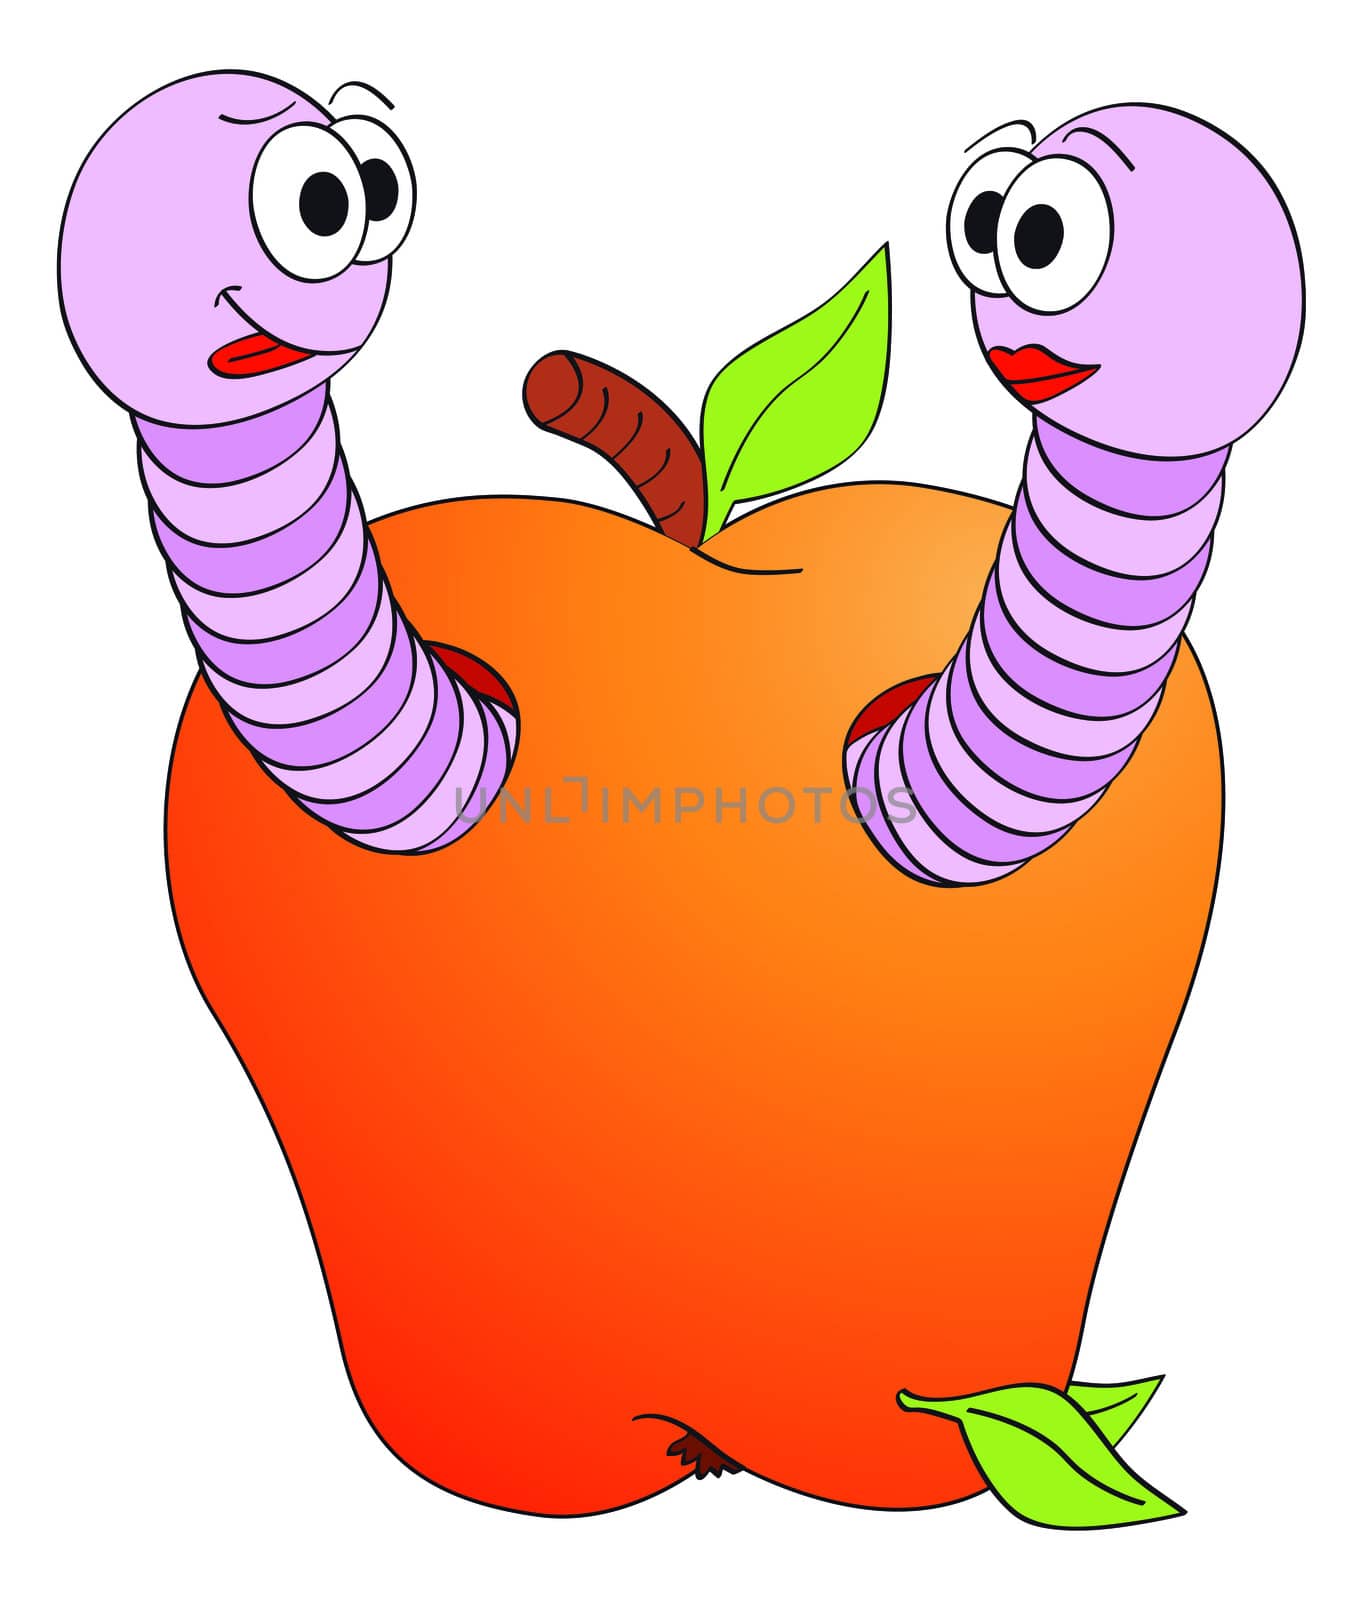 Cartoon smiling worms character in apple illustration isolated on white background